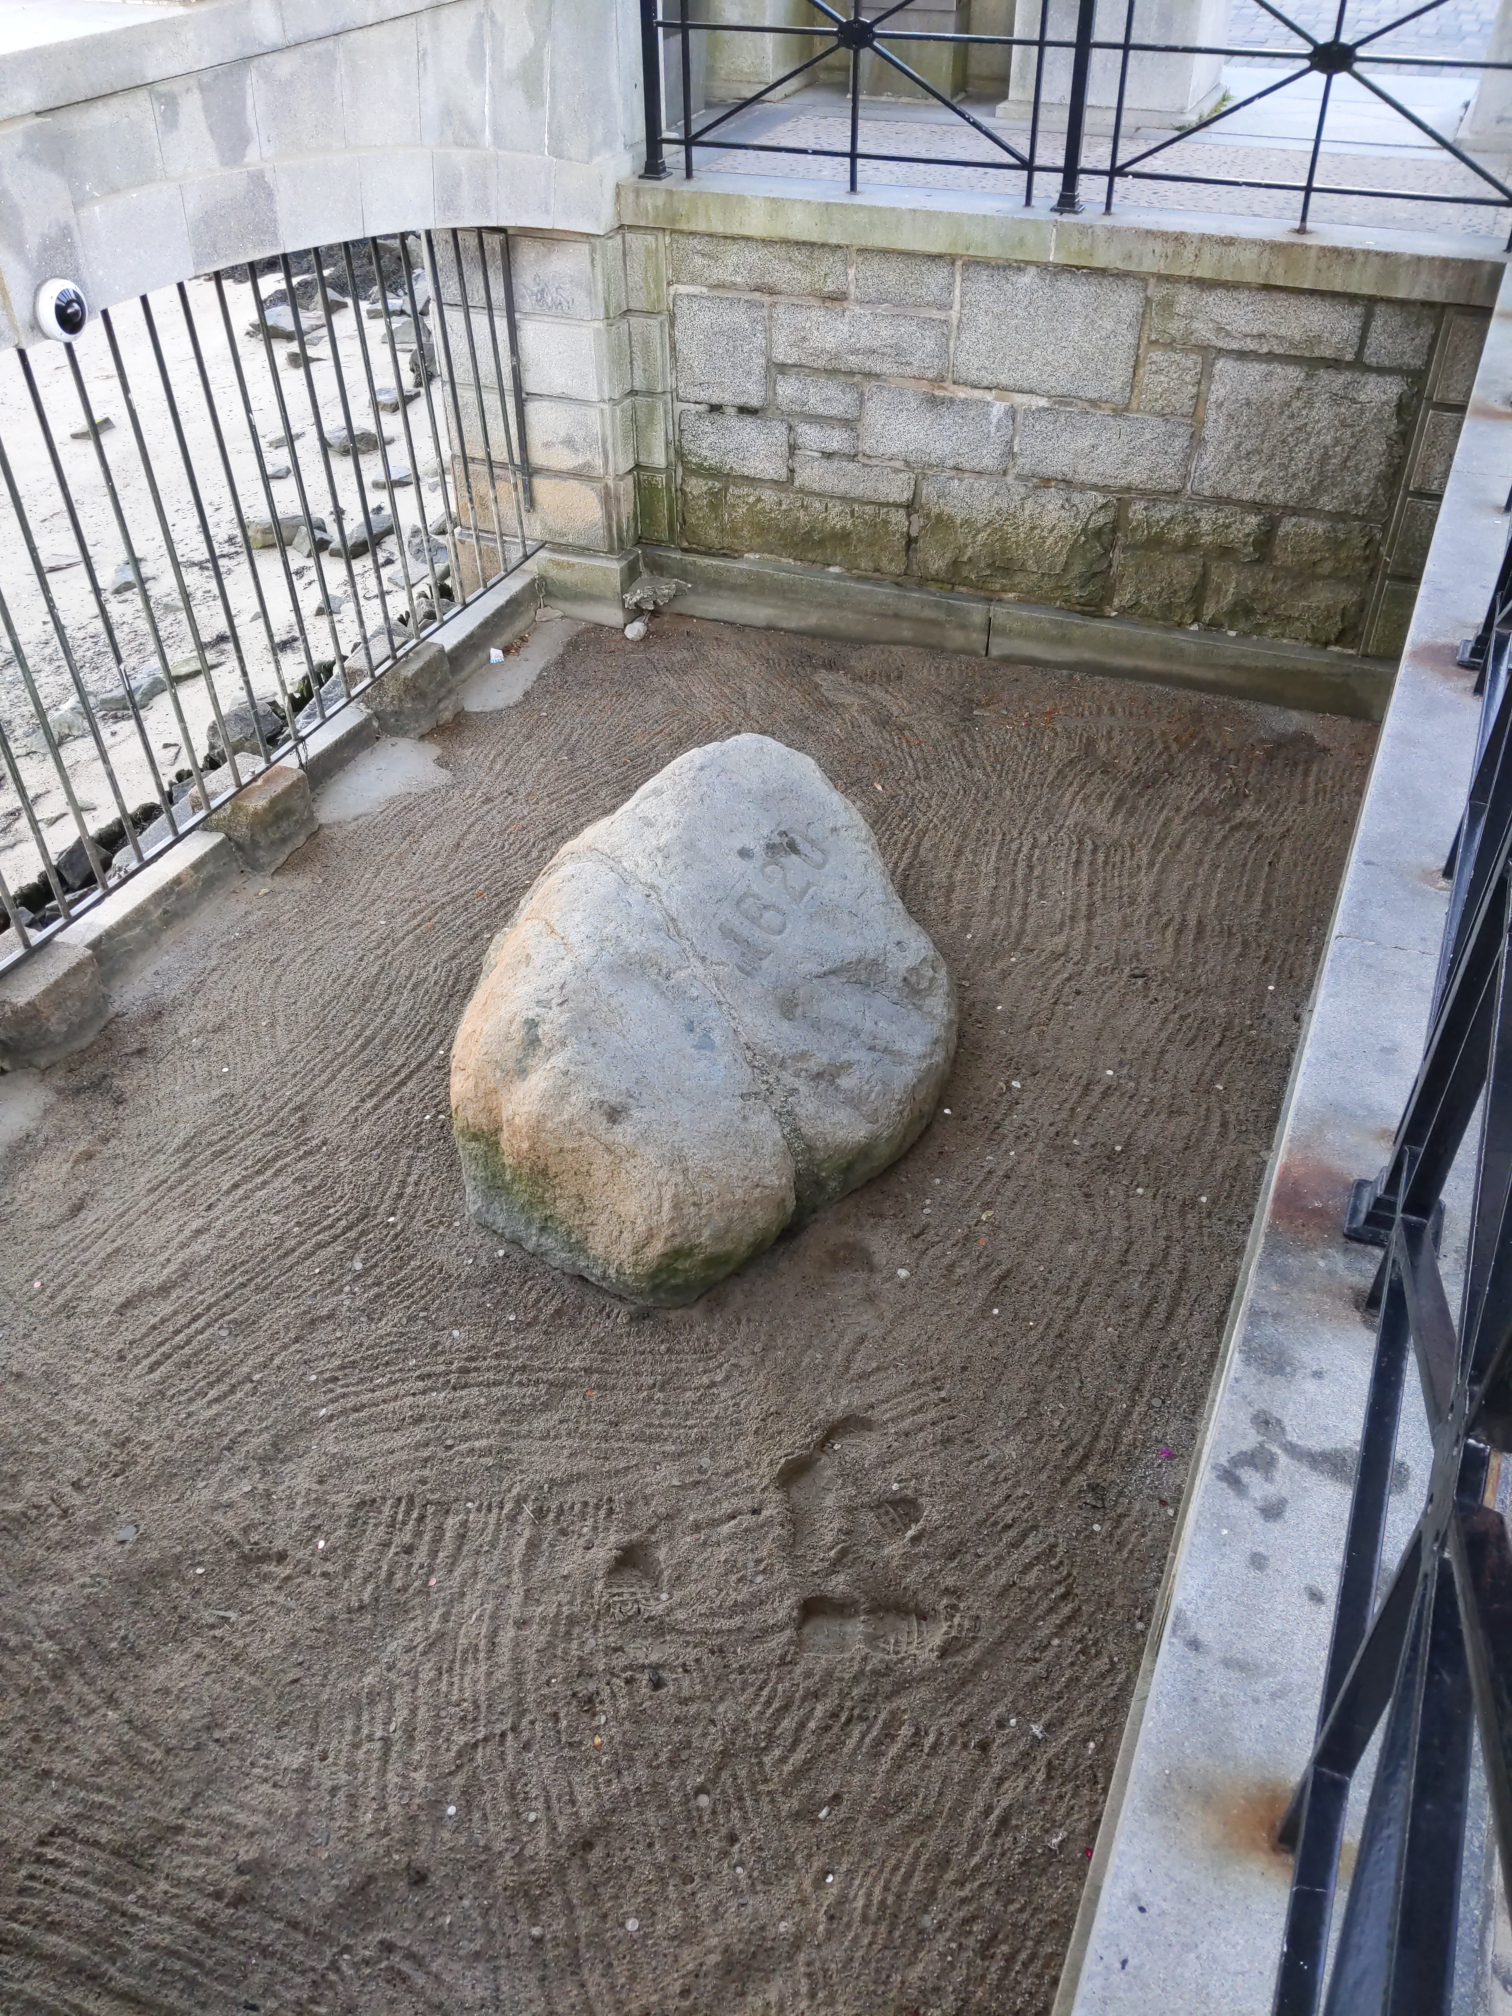 Here is Plymouth Rock, the rock marked by the pilgrims when they traveled to America on the Mayflower. It seems to be marked with the year '1620'.